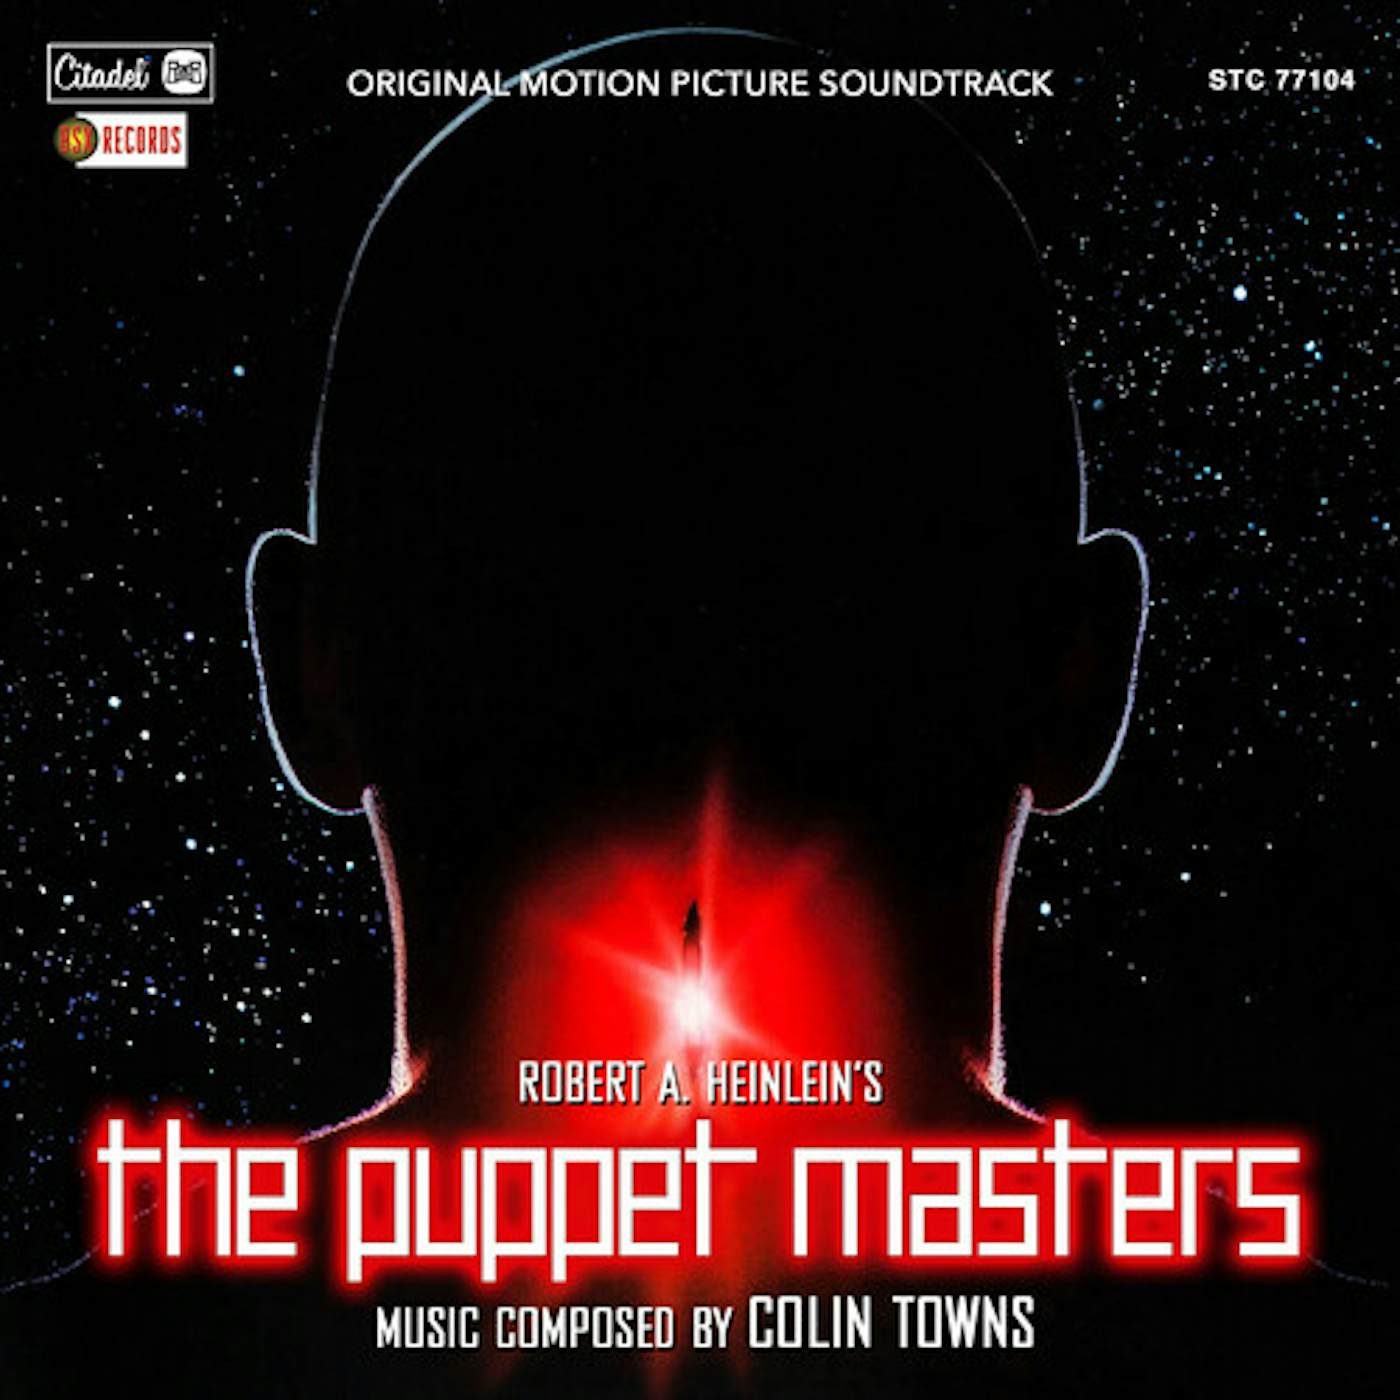 Colin Towns PUPPET MASTERS CD